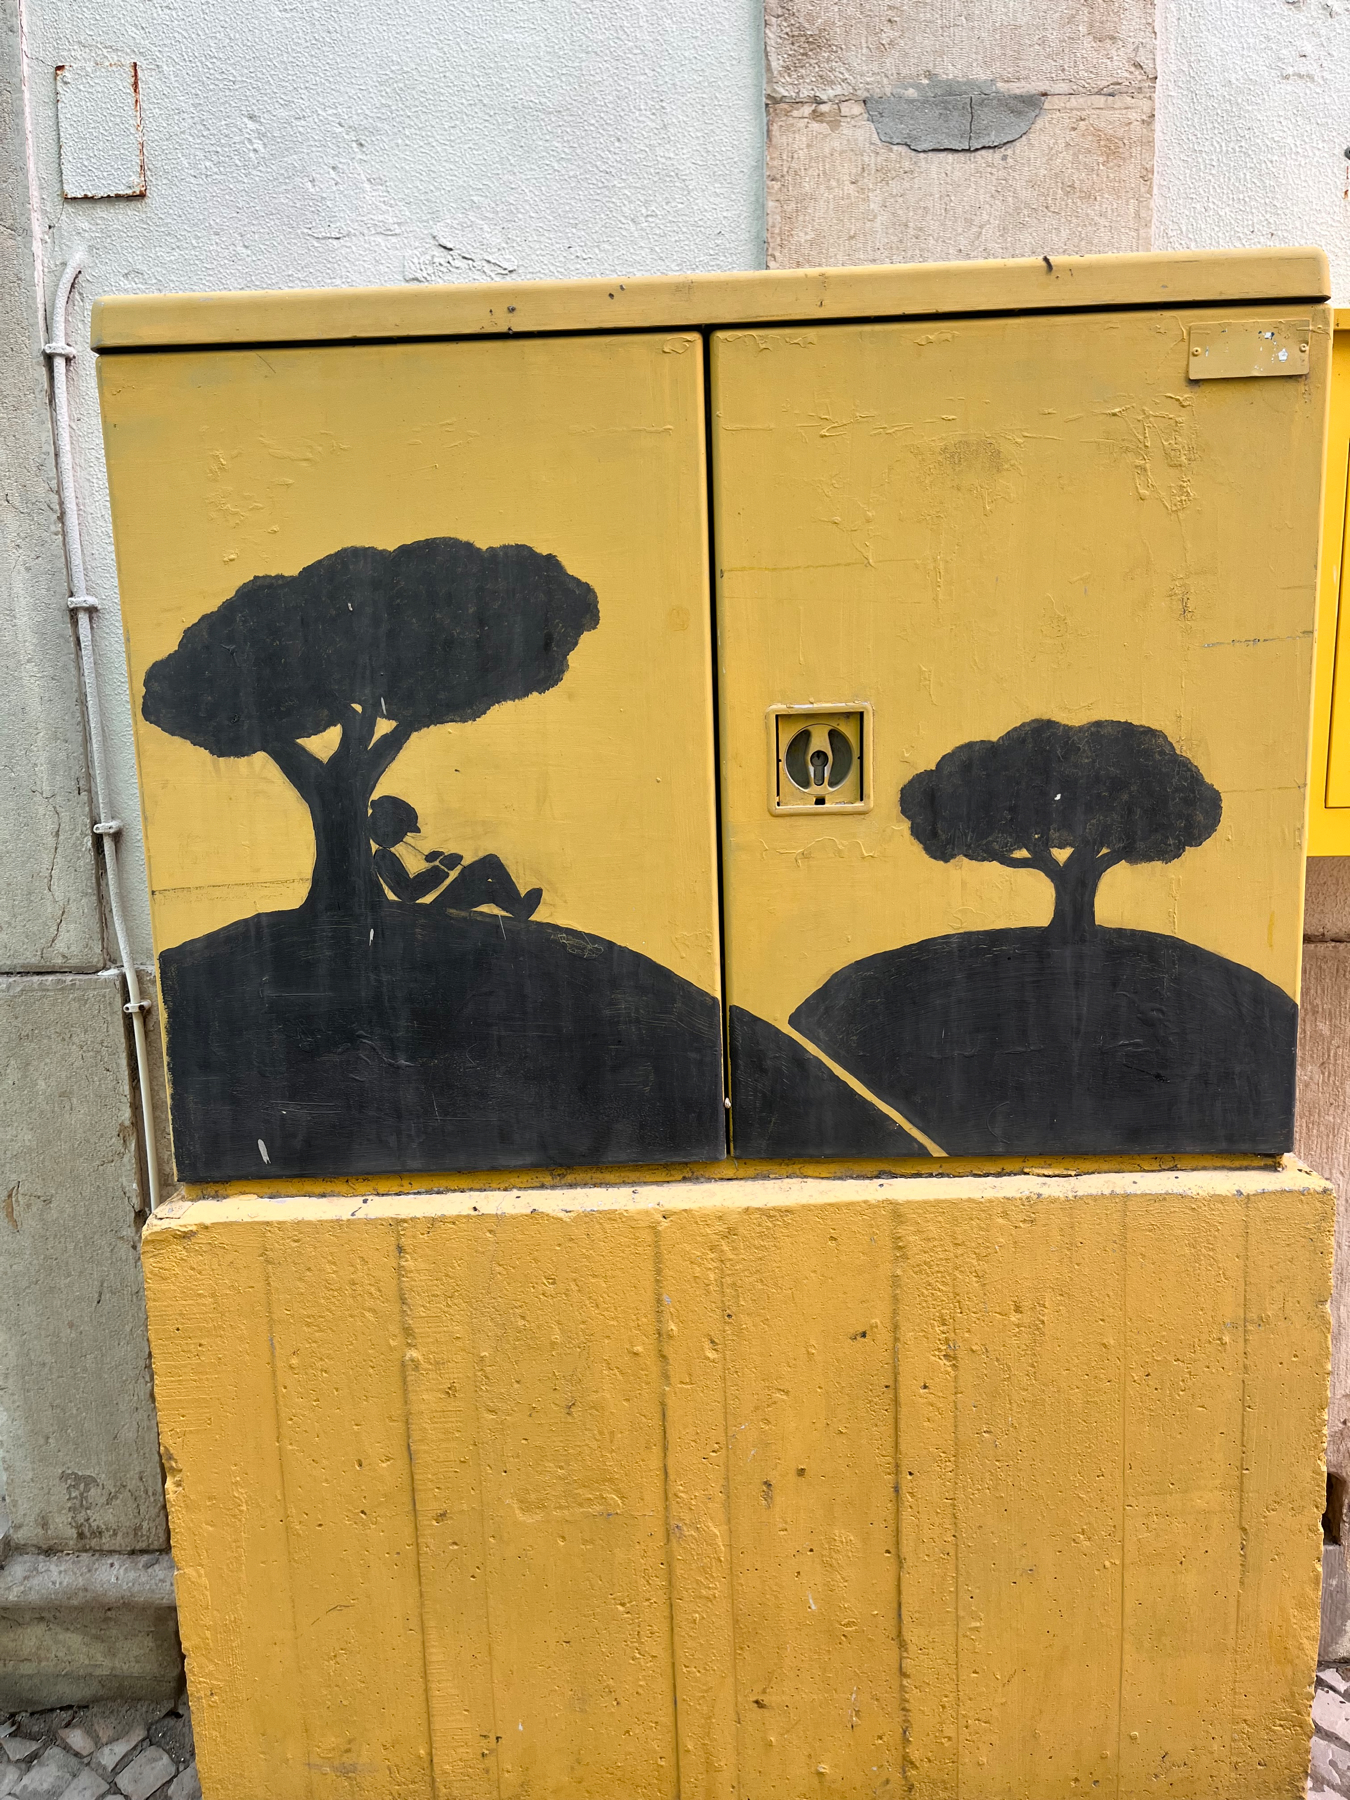 Drawing on an outside cabinet of a man sleeping under a tree